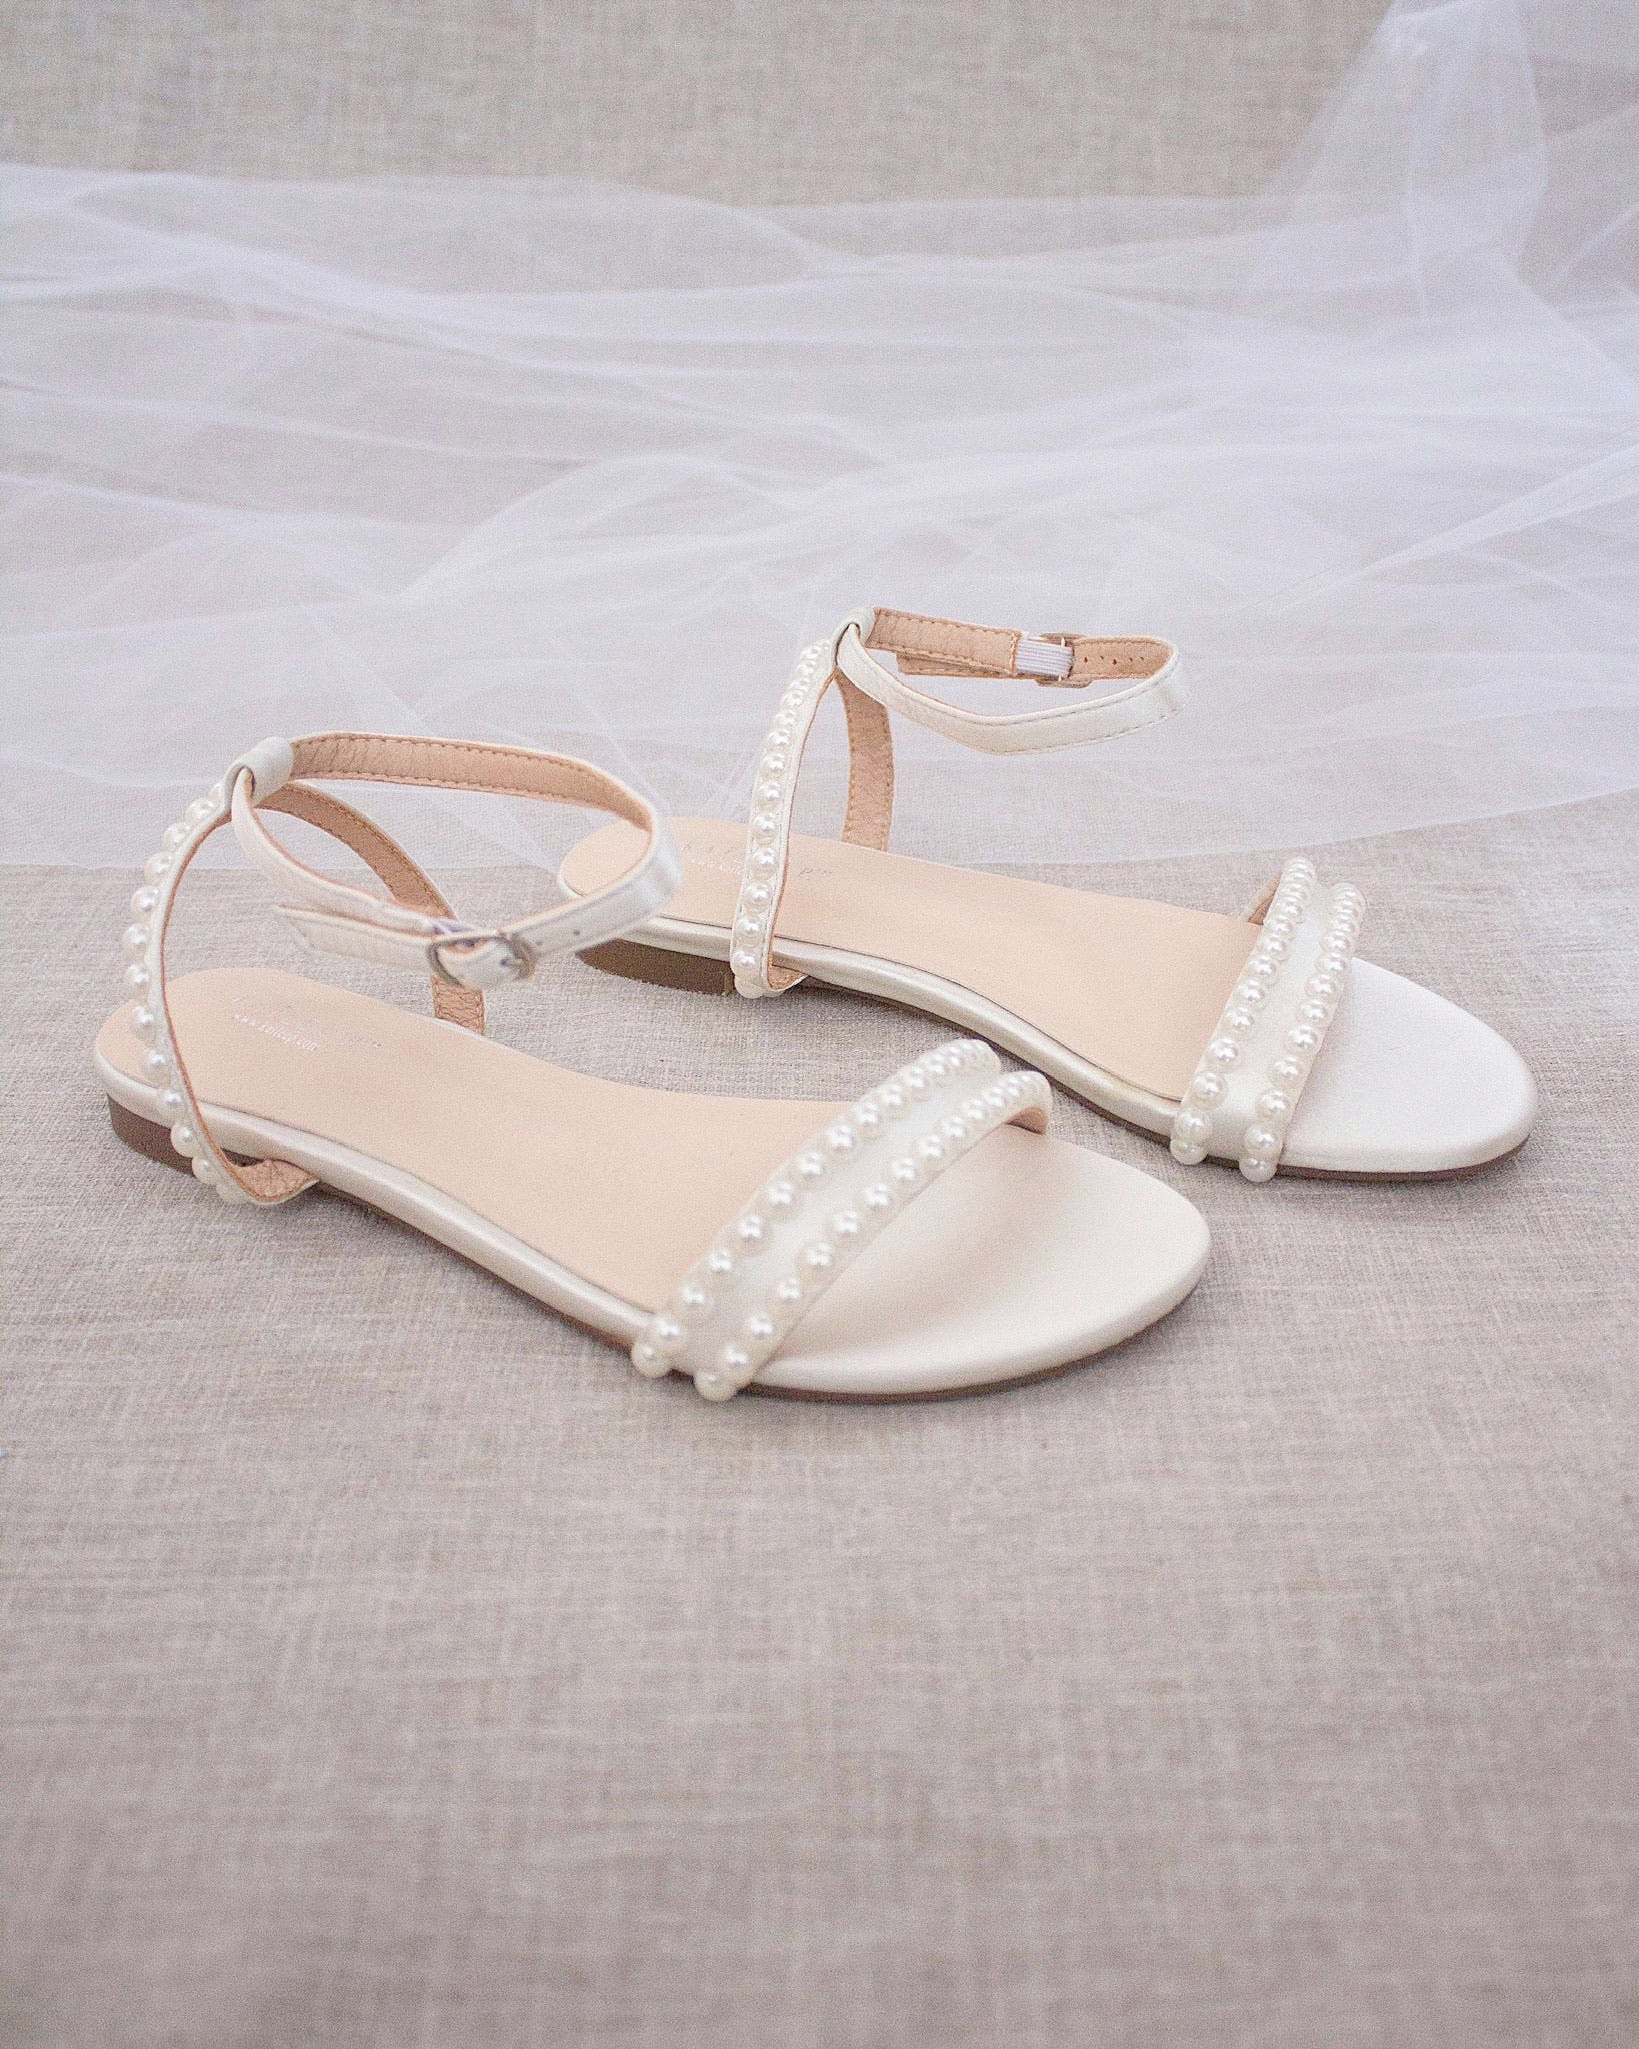 Ivory Satin Flat Sandal With PEARLS Bridesmaid Shoes Women - Etsy